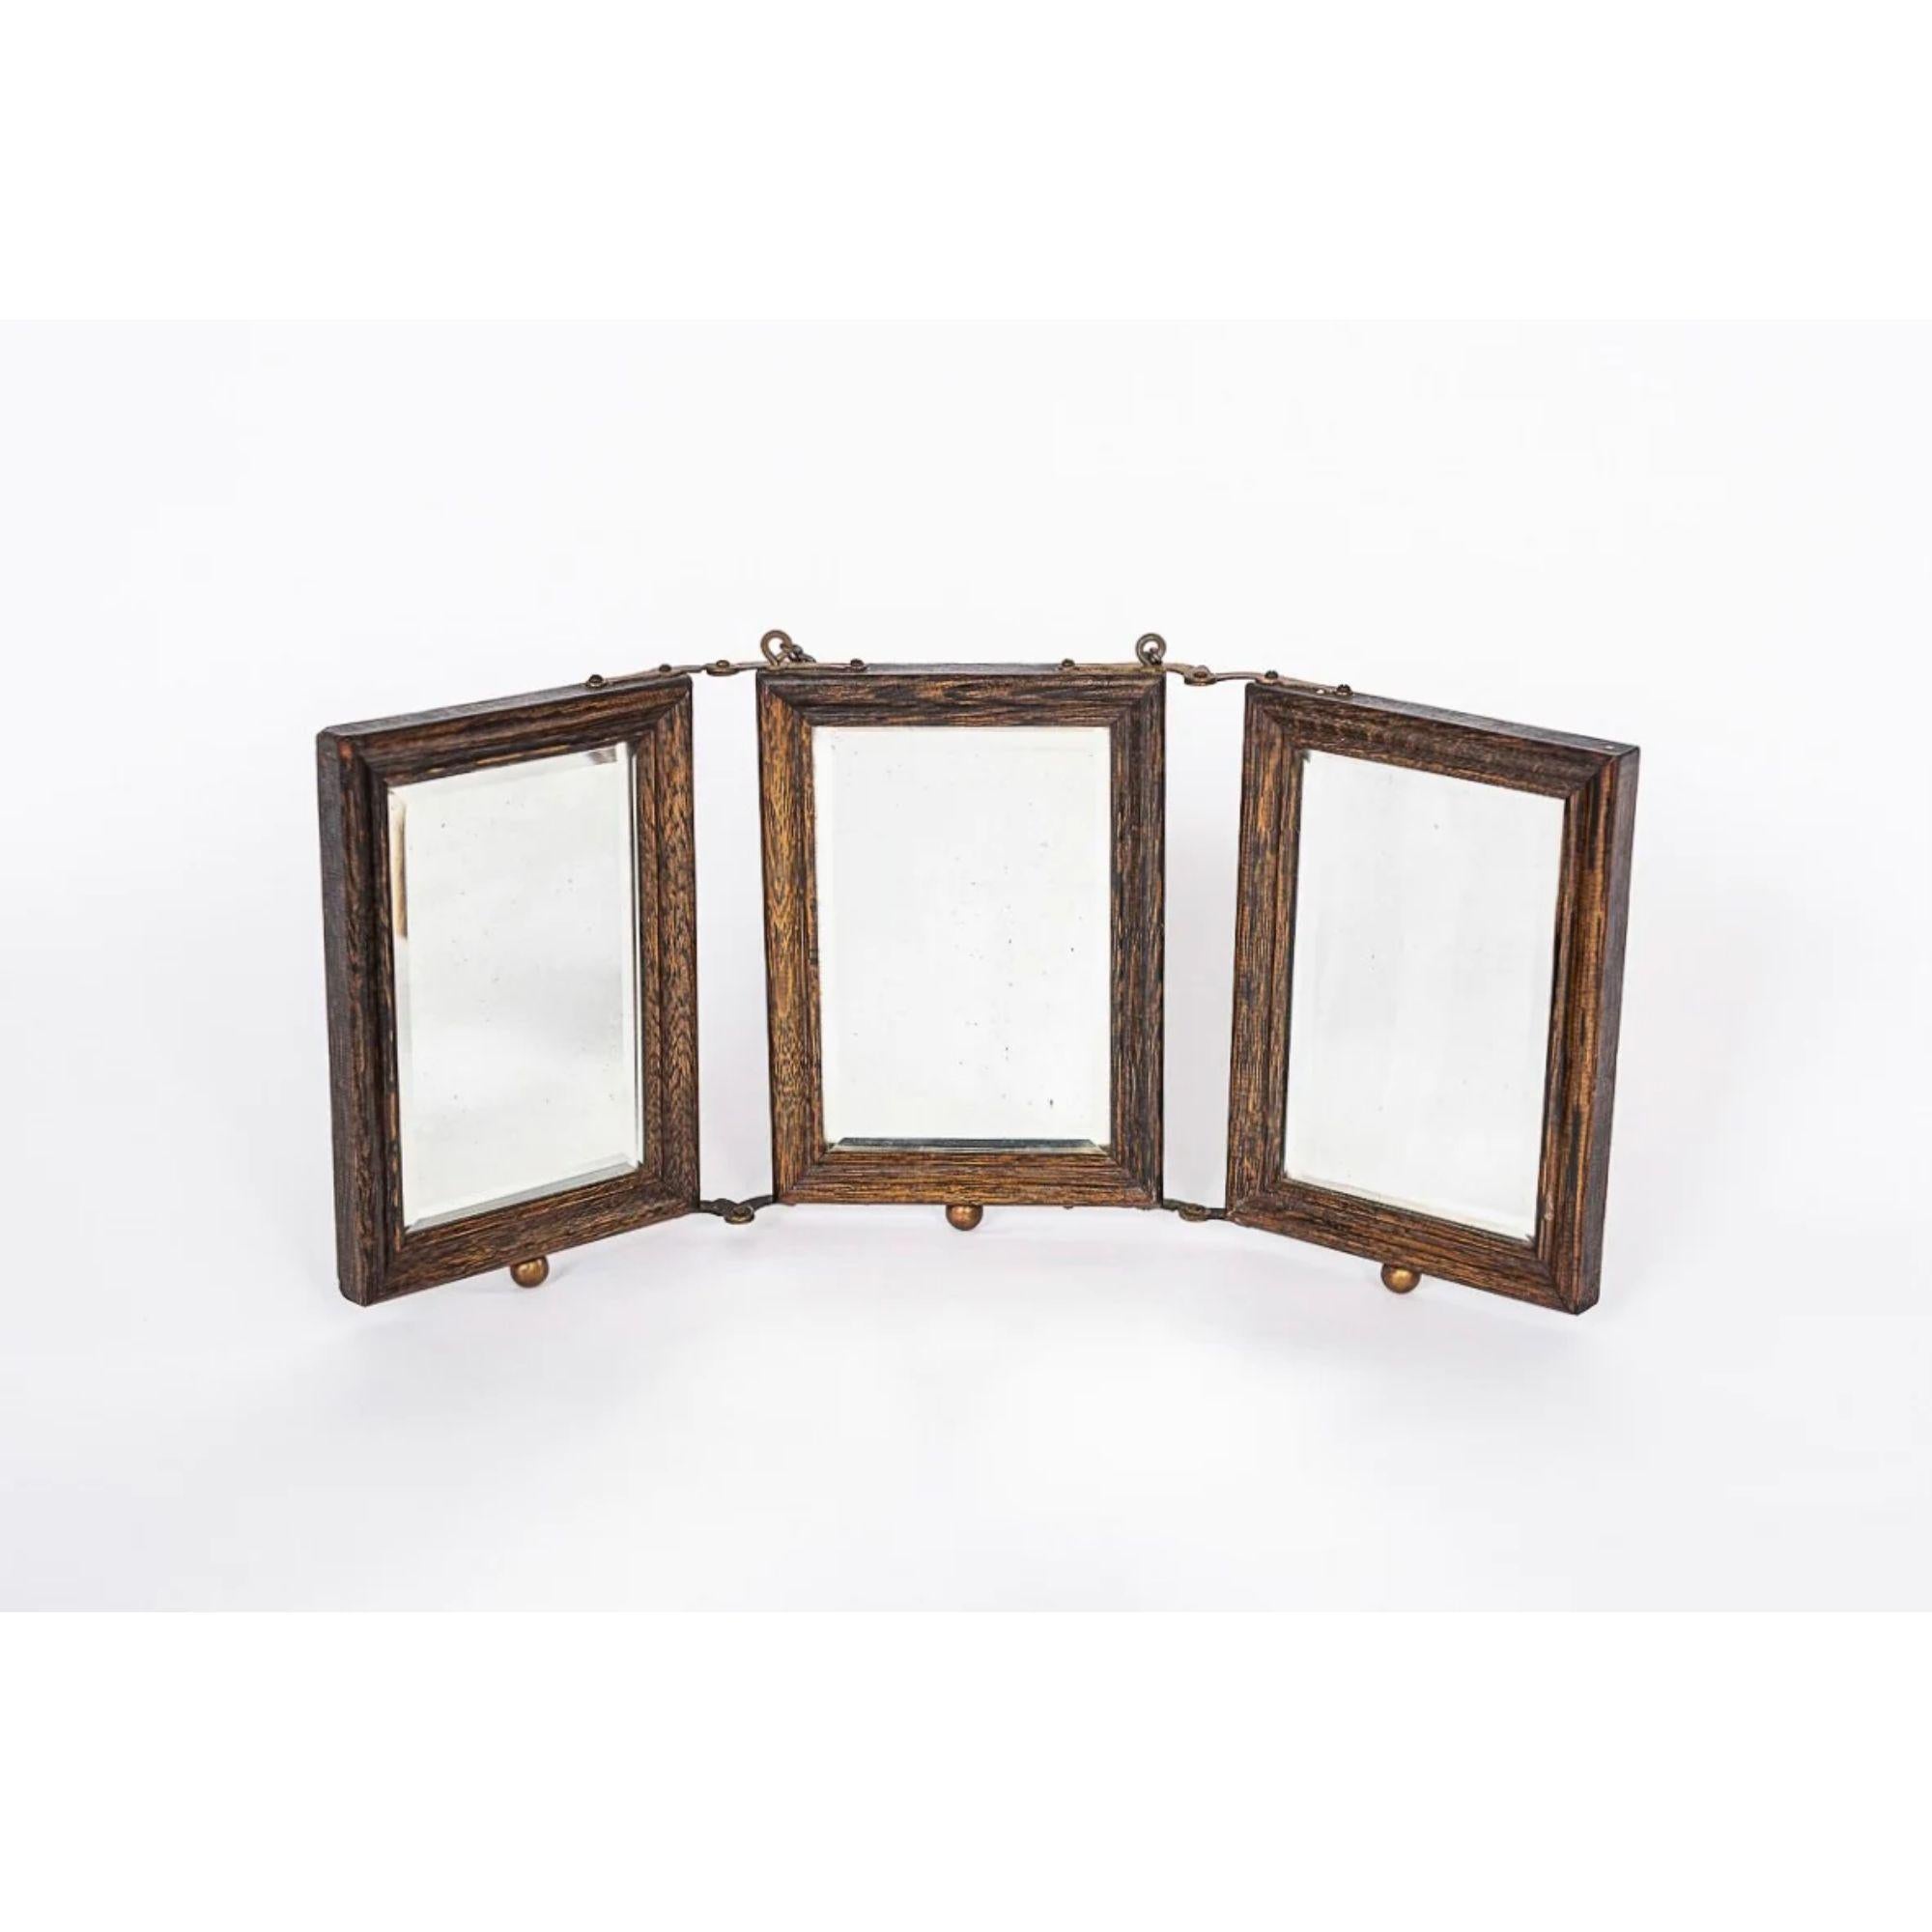 This exceptional antique Victorian barber’s shaving or travel mirror circa 1910 has three beveled mirrors set in a beautiful oak wood frame with embossed industrial brass embellishments and riveted hinges. These versatile travel mirrors were